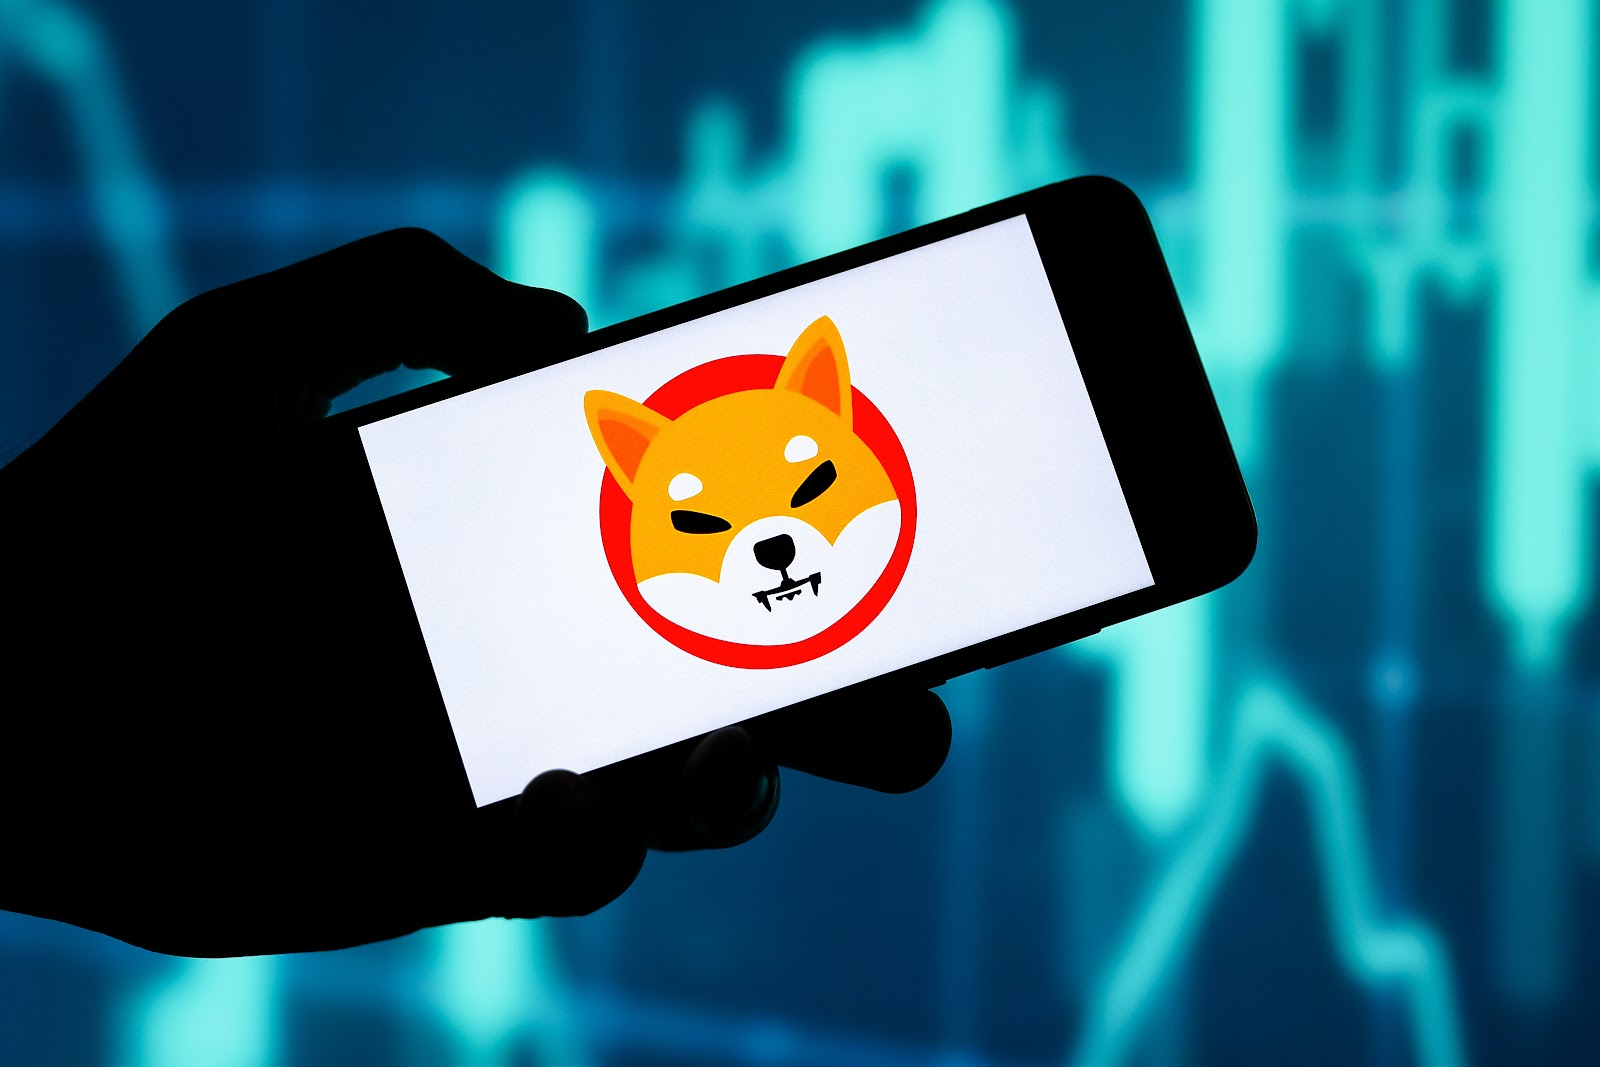 Best Cryptos to Buy Now? Shiba Inu, Pullix And Polygon According to Market Trends